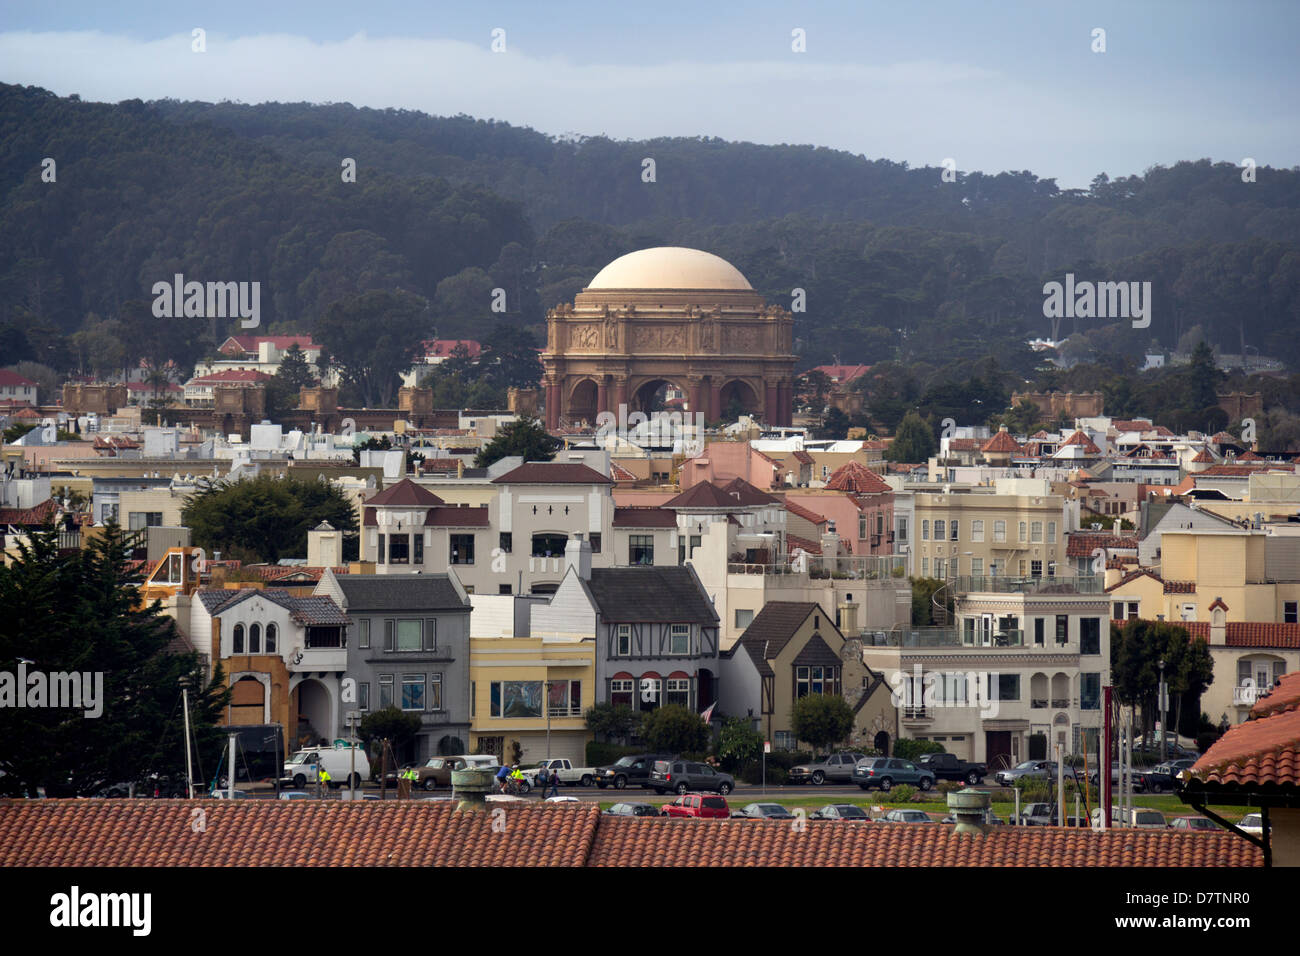 Homes on the waterfront in the Marina District with the Palace of Fine Arts in the background, San Francisco, California, USA Stock Photo